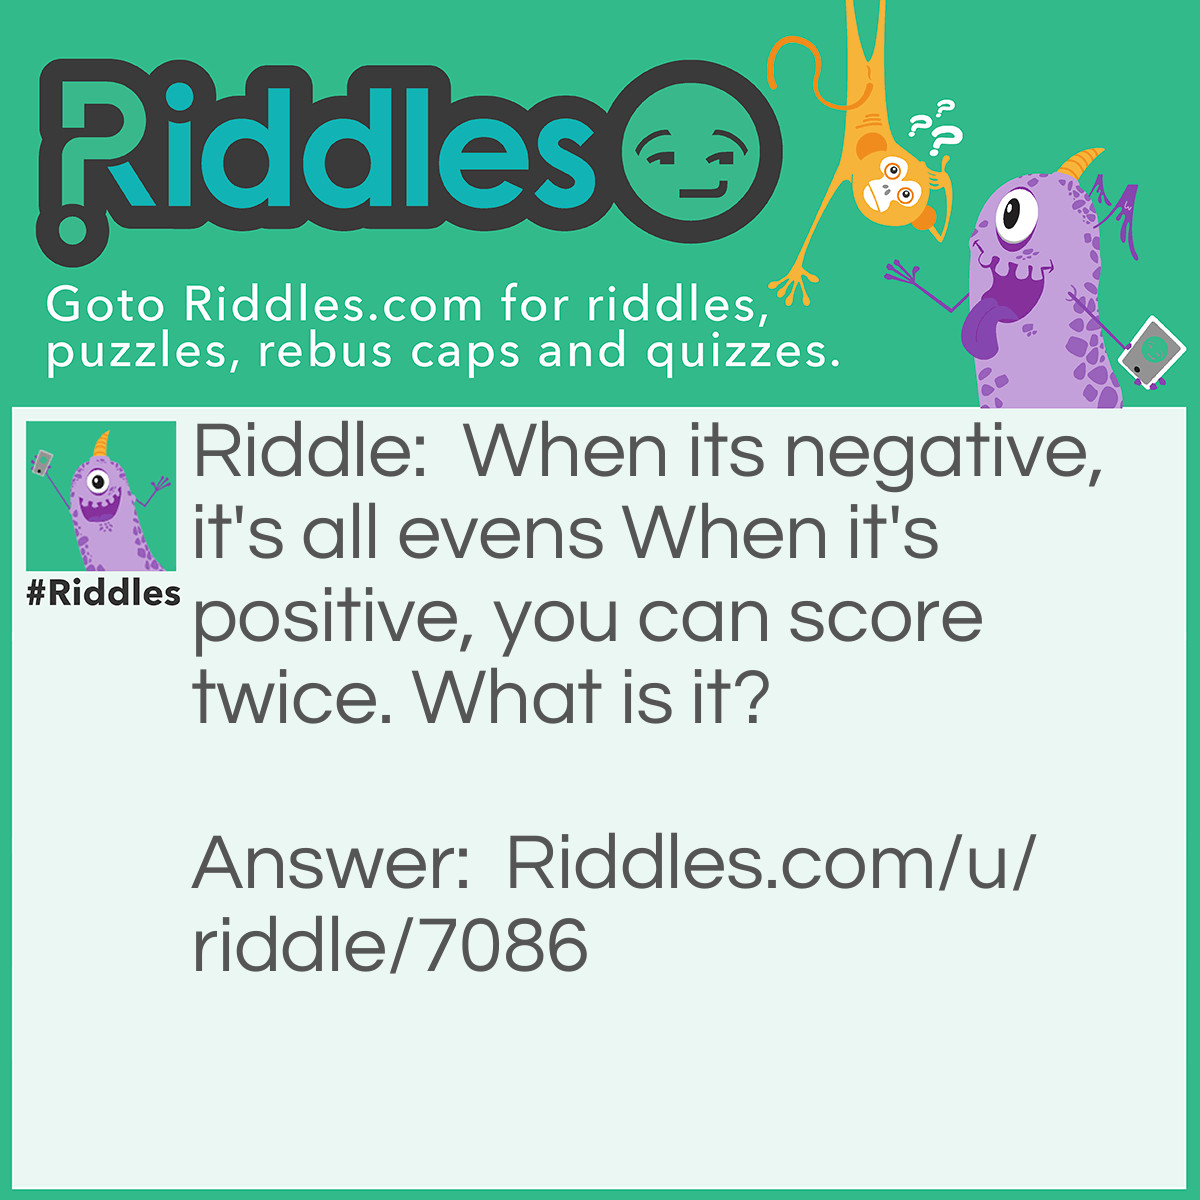 Riddle: When its negative, it's all evens
When it's positive, you can score twice.
What is it? Answer: 40.